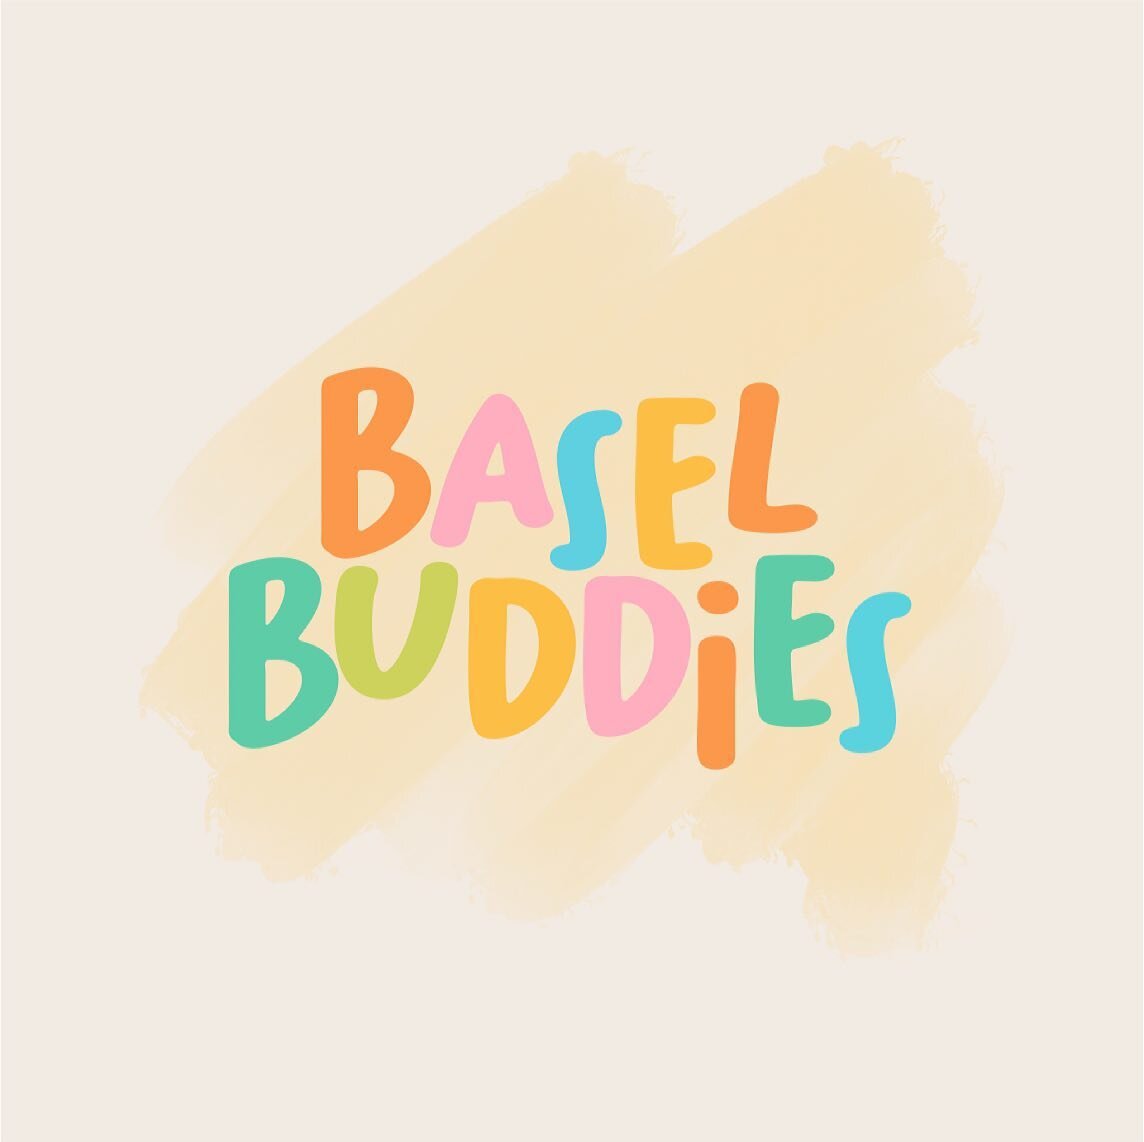 Meet Basel Buddies. We are a non profit that focuses on encouragement and the empowerment of our community&rsquo;s underprivileged youth through art. 
.
.
.
.
#baselbuddies #getinspired #inspirecreatesucceed #philanthropy #nonprofit #donate #communit